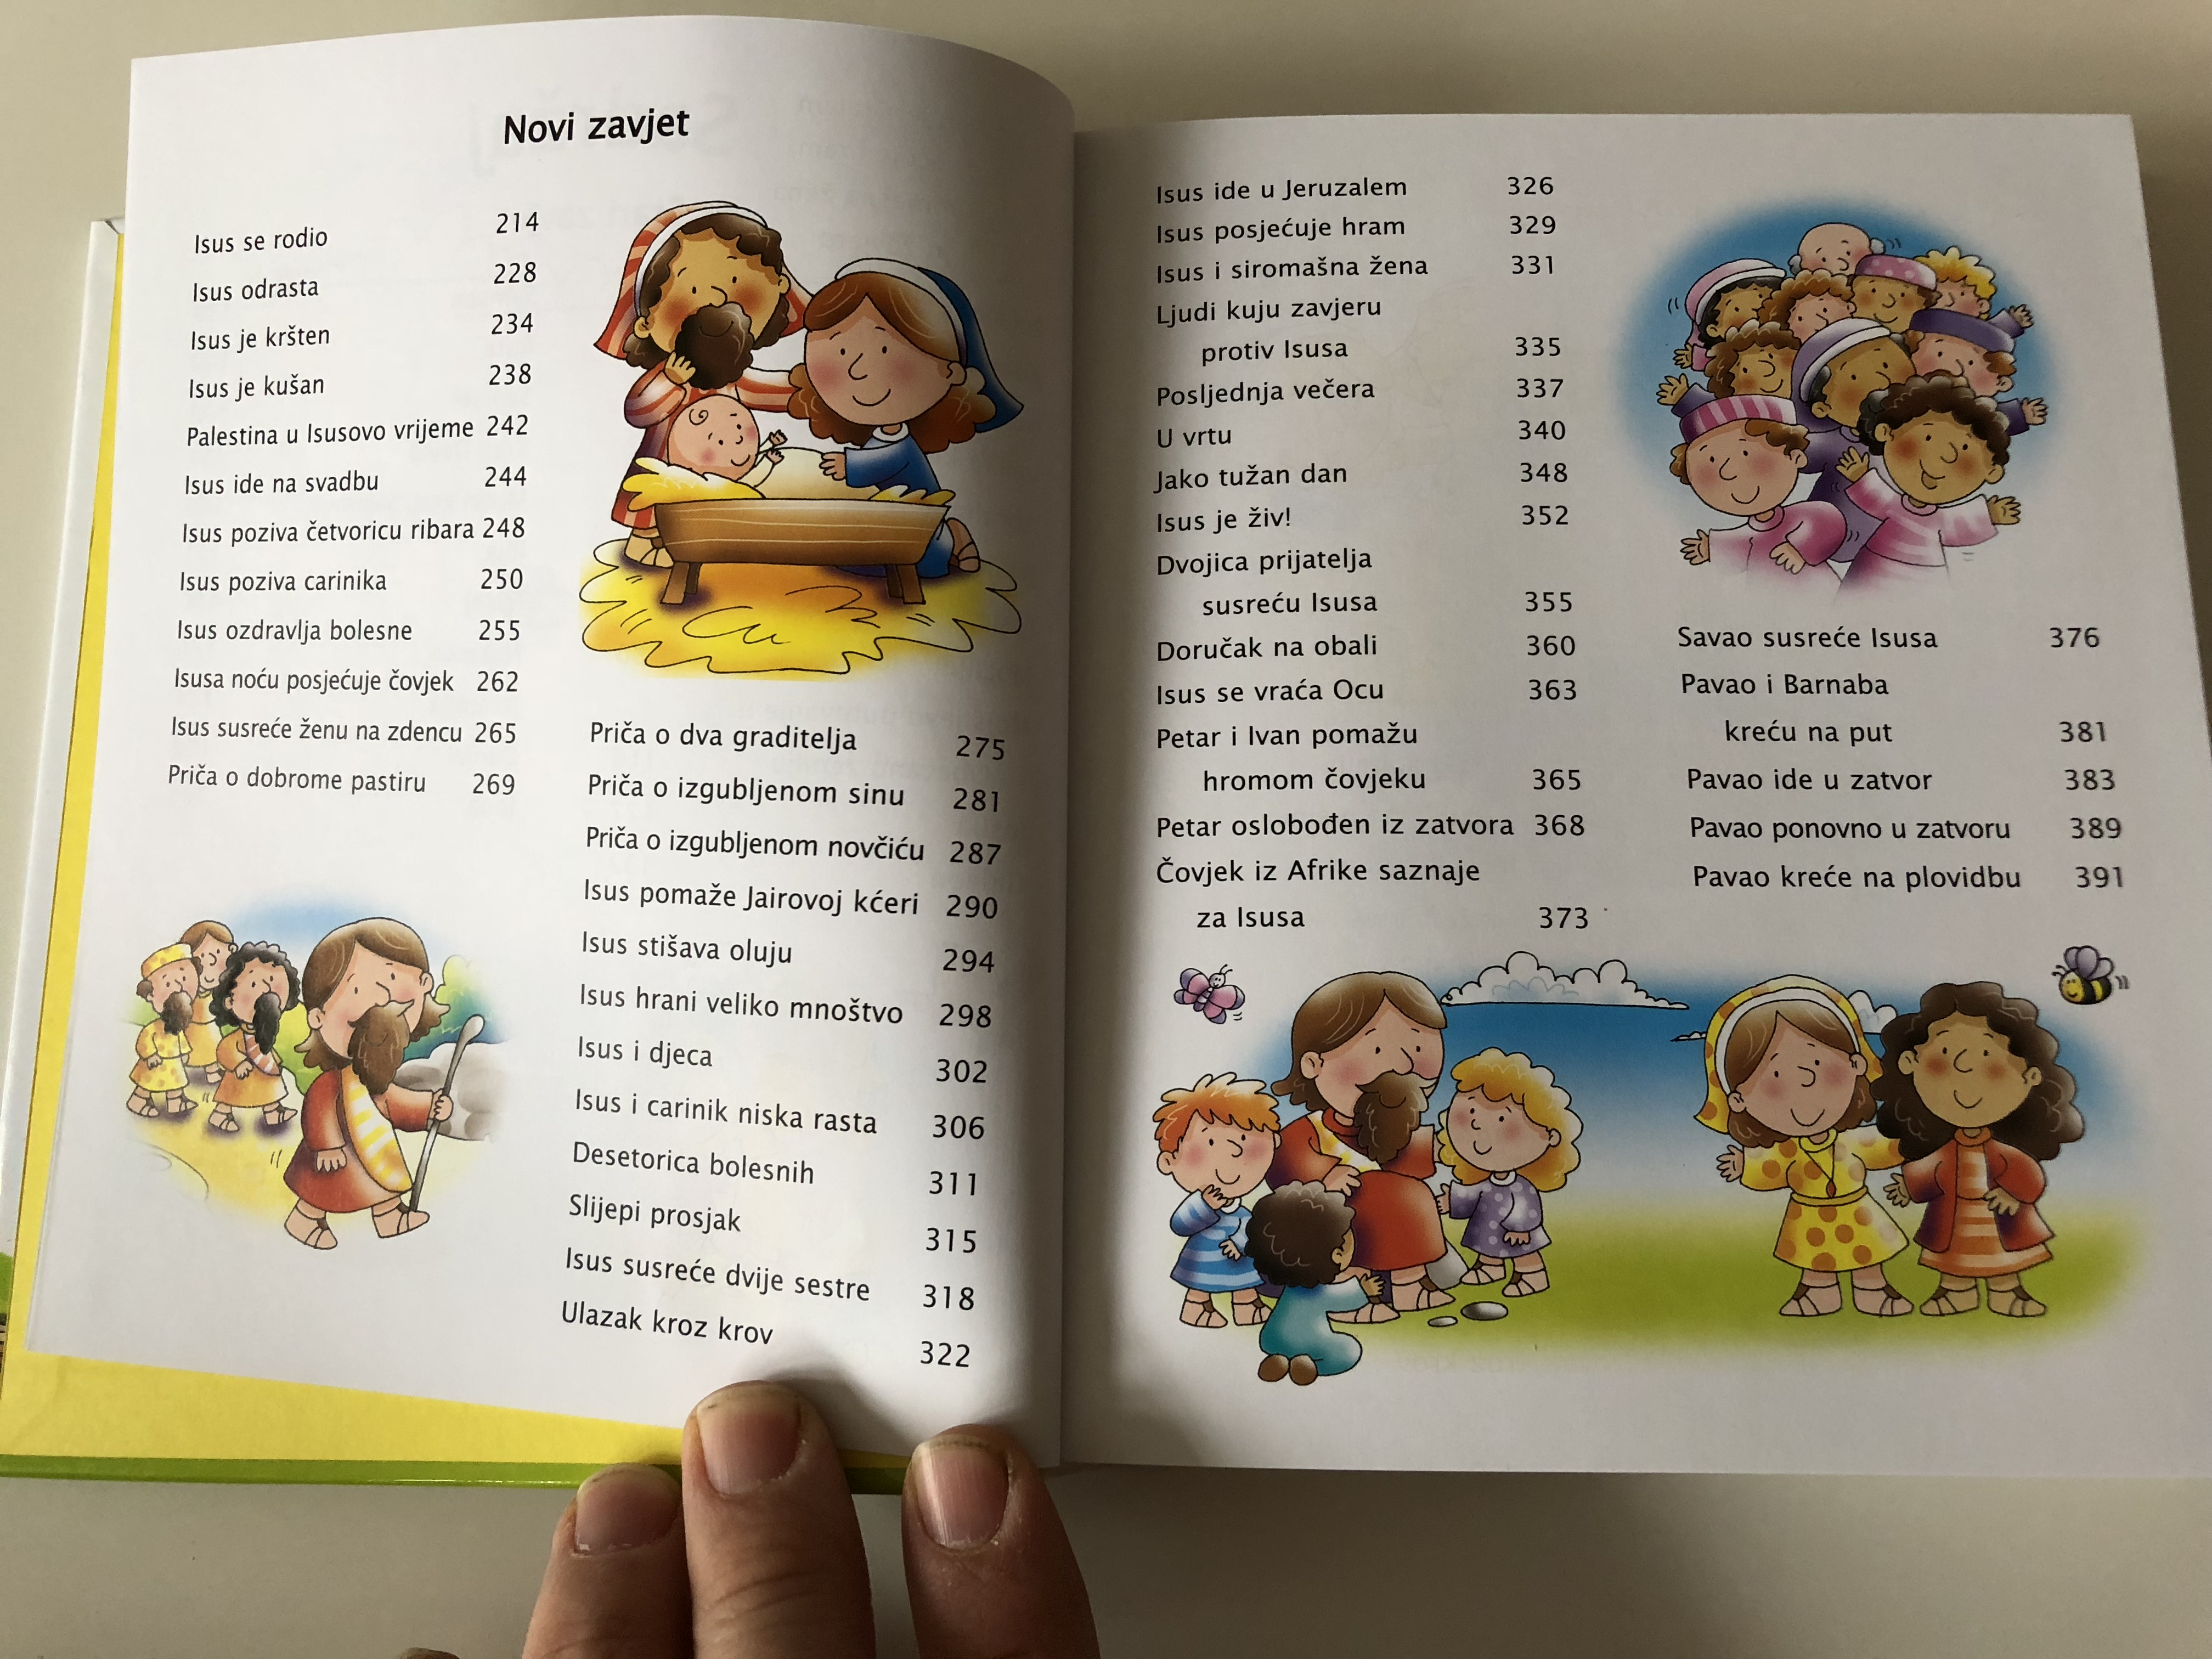 croatian-bible-for-little-ones-color-illustrated-childrens-bible-8-.jpg